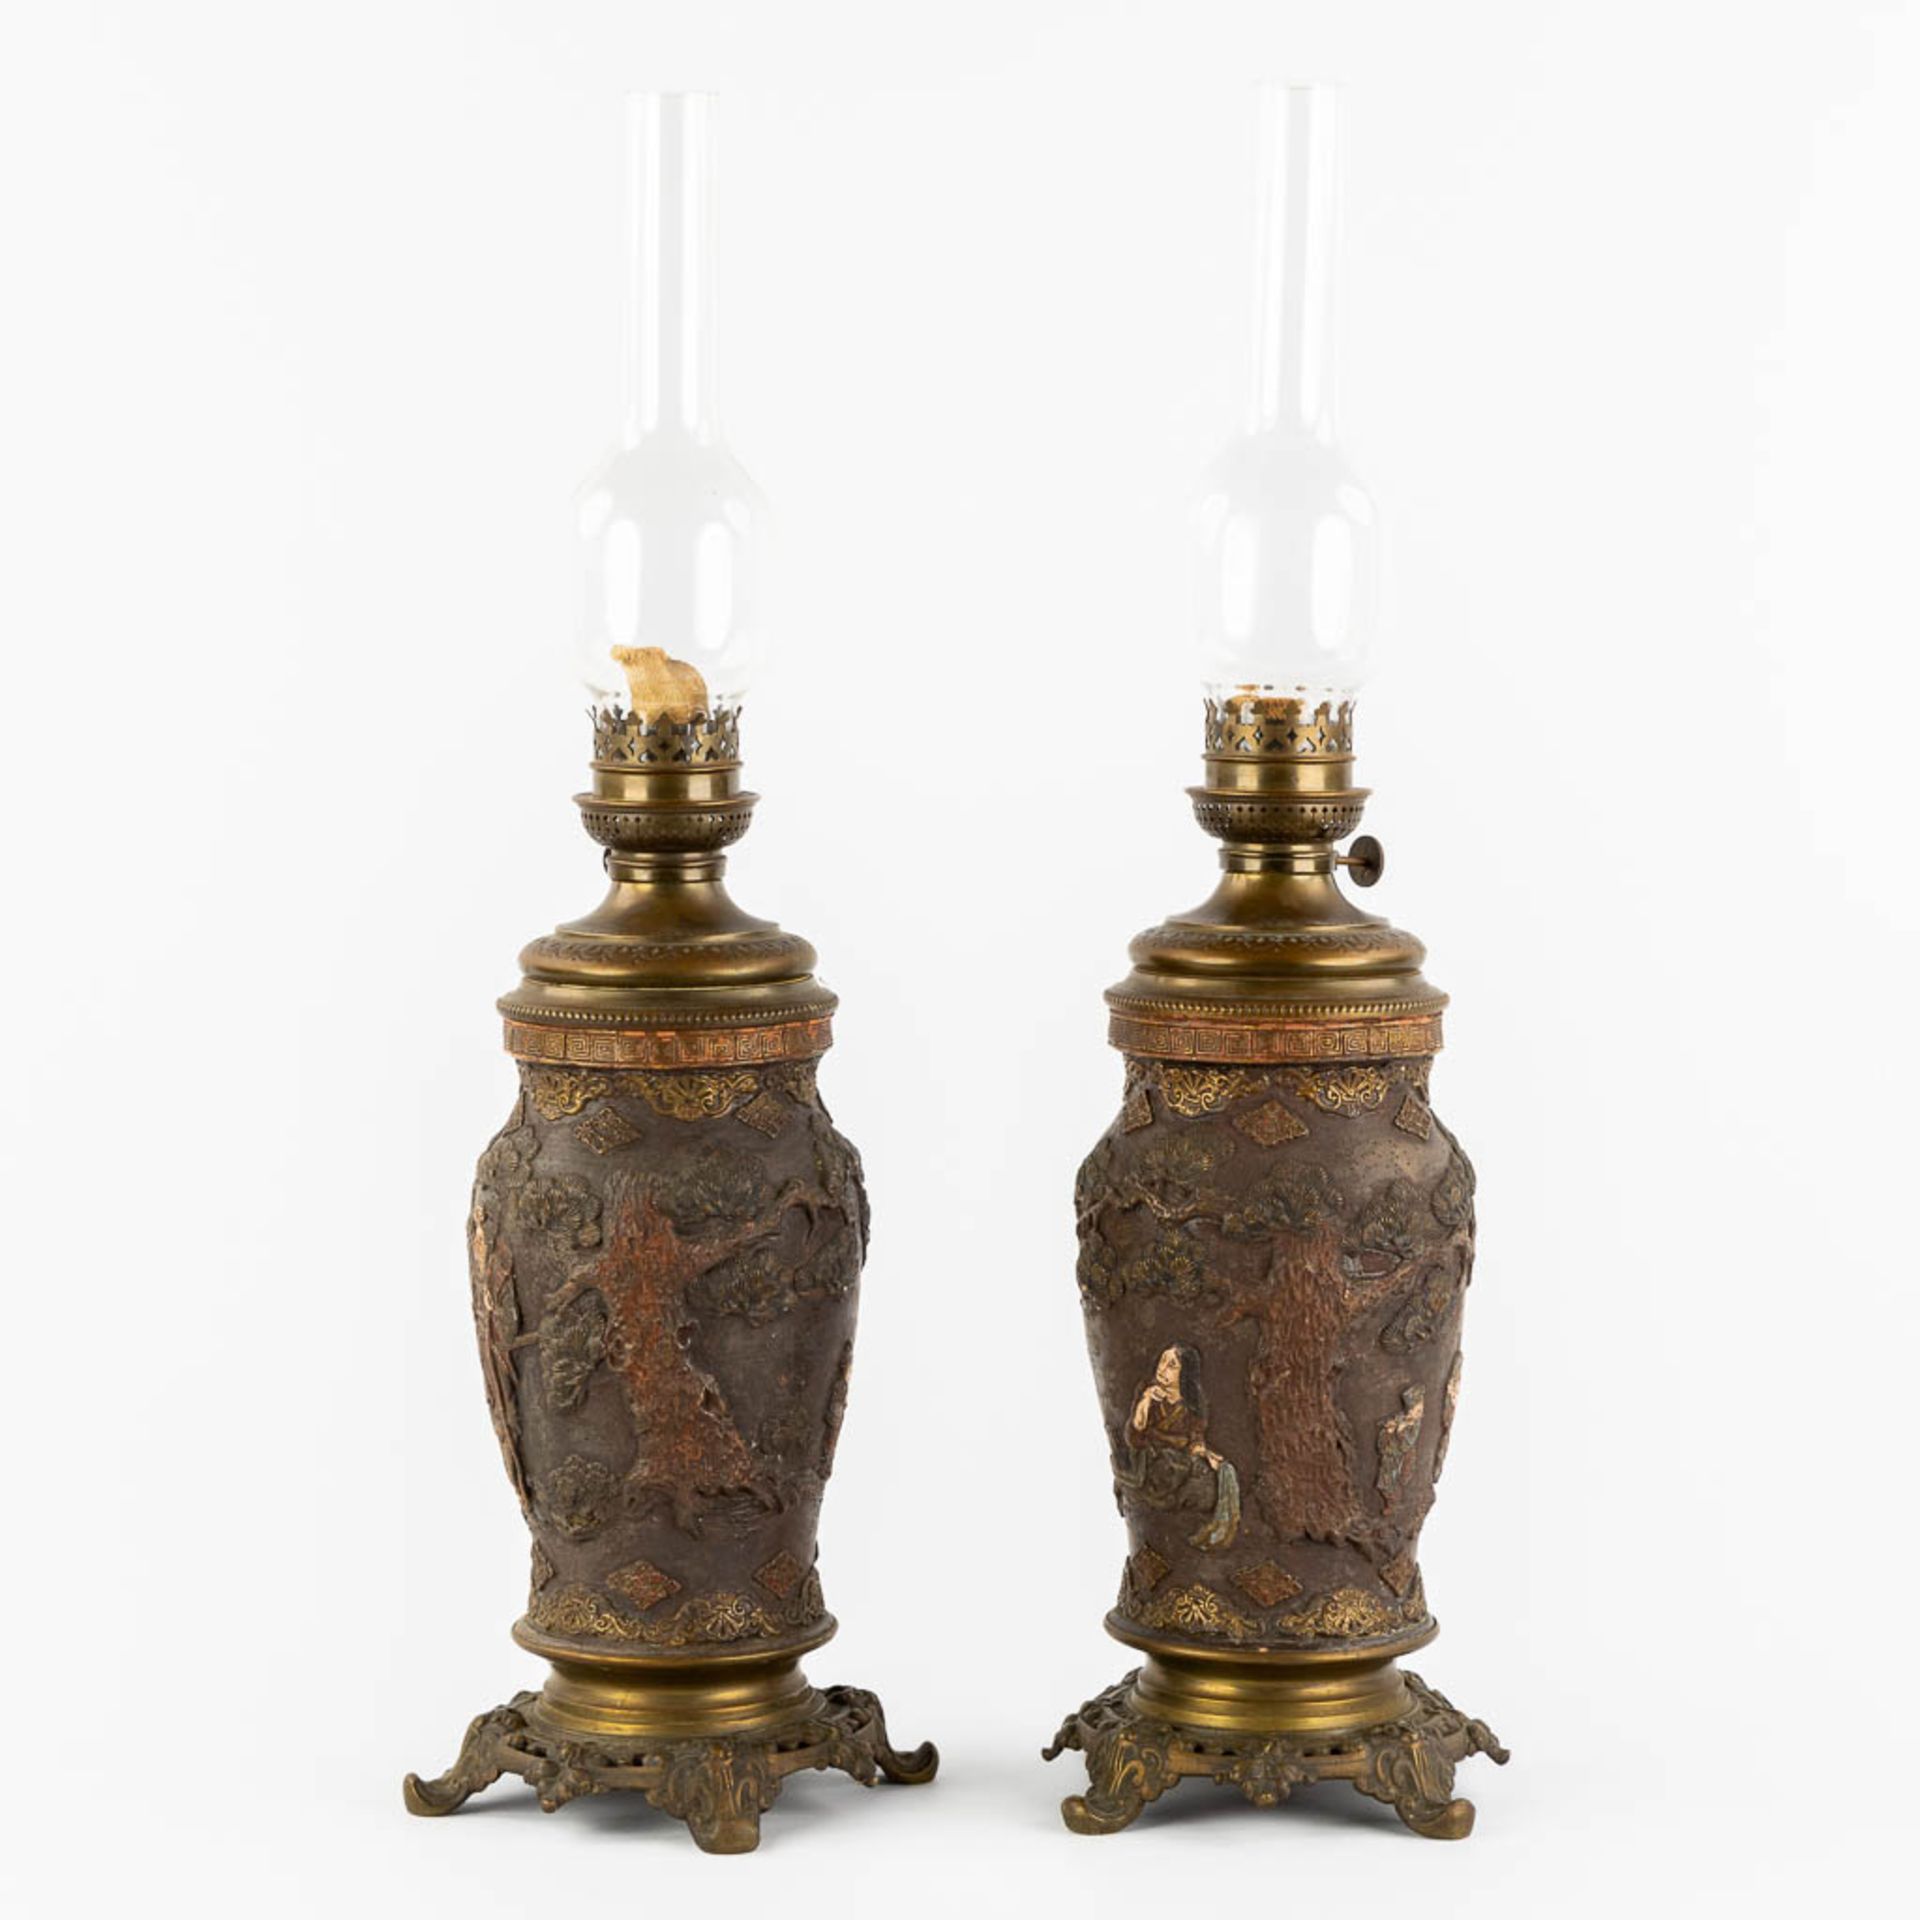 An Oriental pair of oil lamps, terracotta mounted with bronze. Circa 1900. (H:66 x D:18 cm) - Image 7 of 17